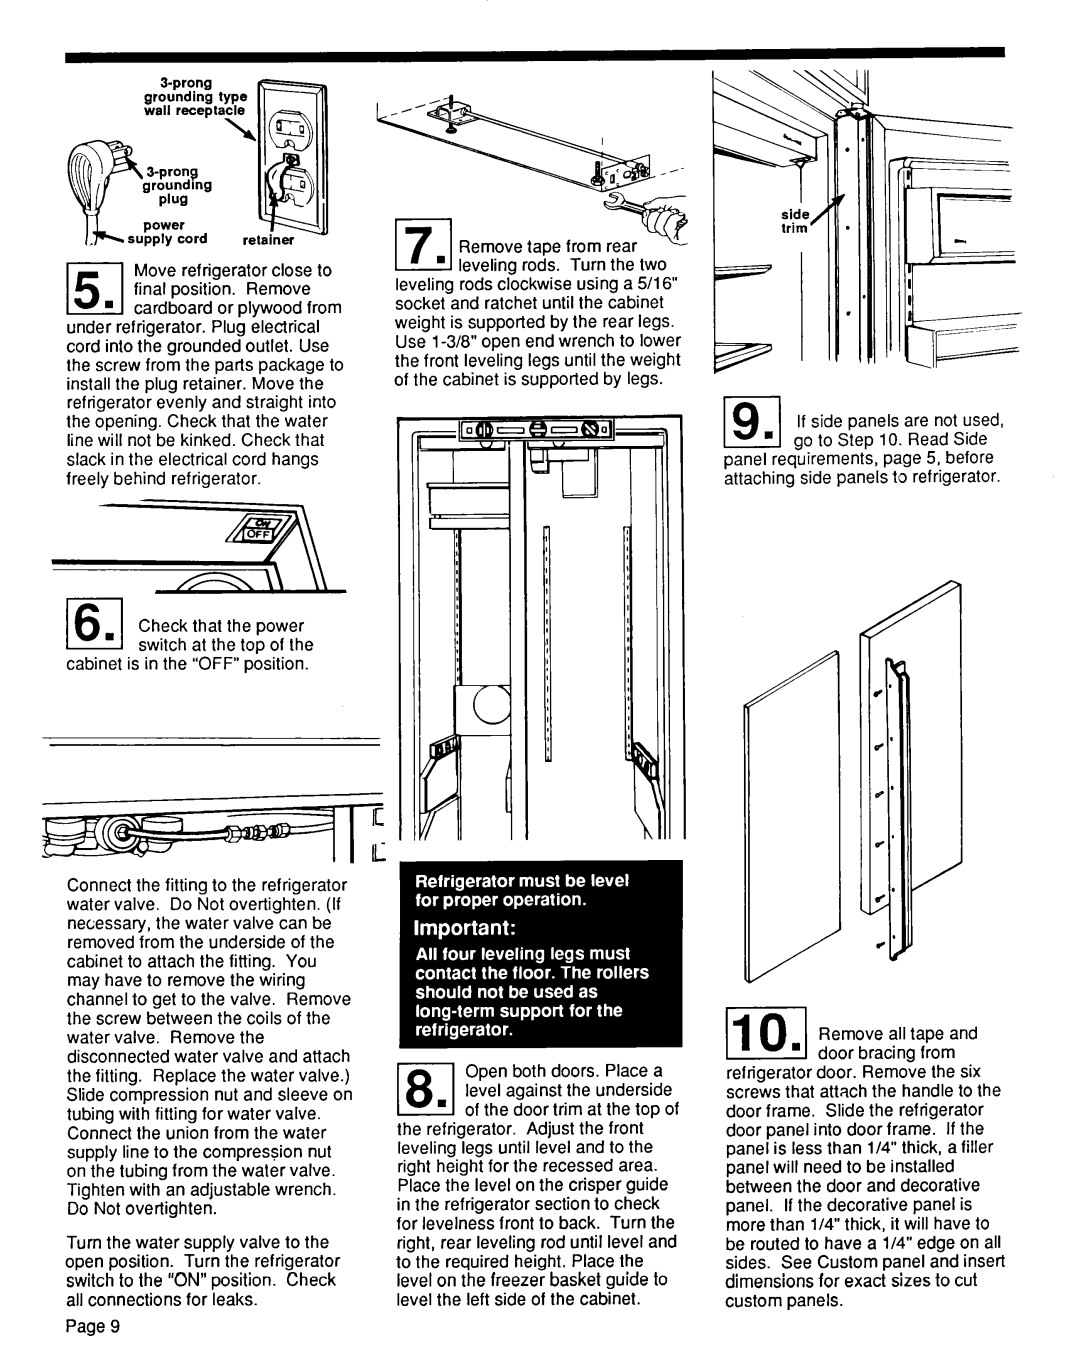 KitchenAid KSRF36DT manual P-IIf side panels are not used, ’ go to . Read Side, power supply cord 